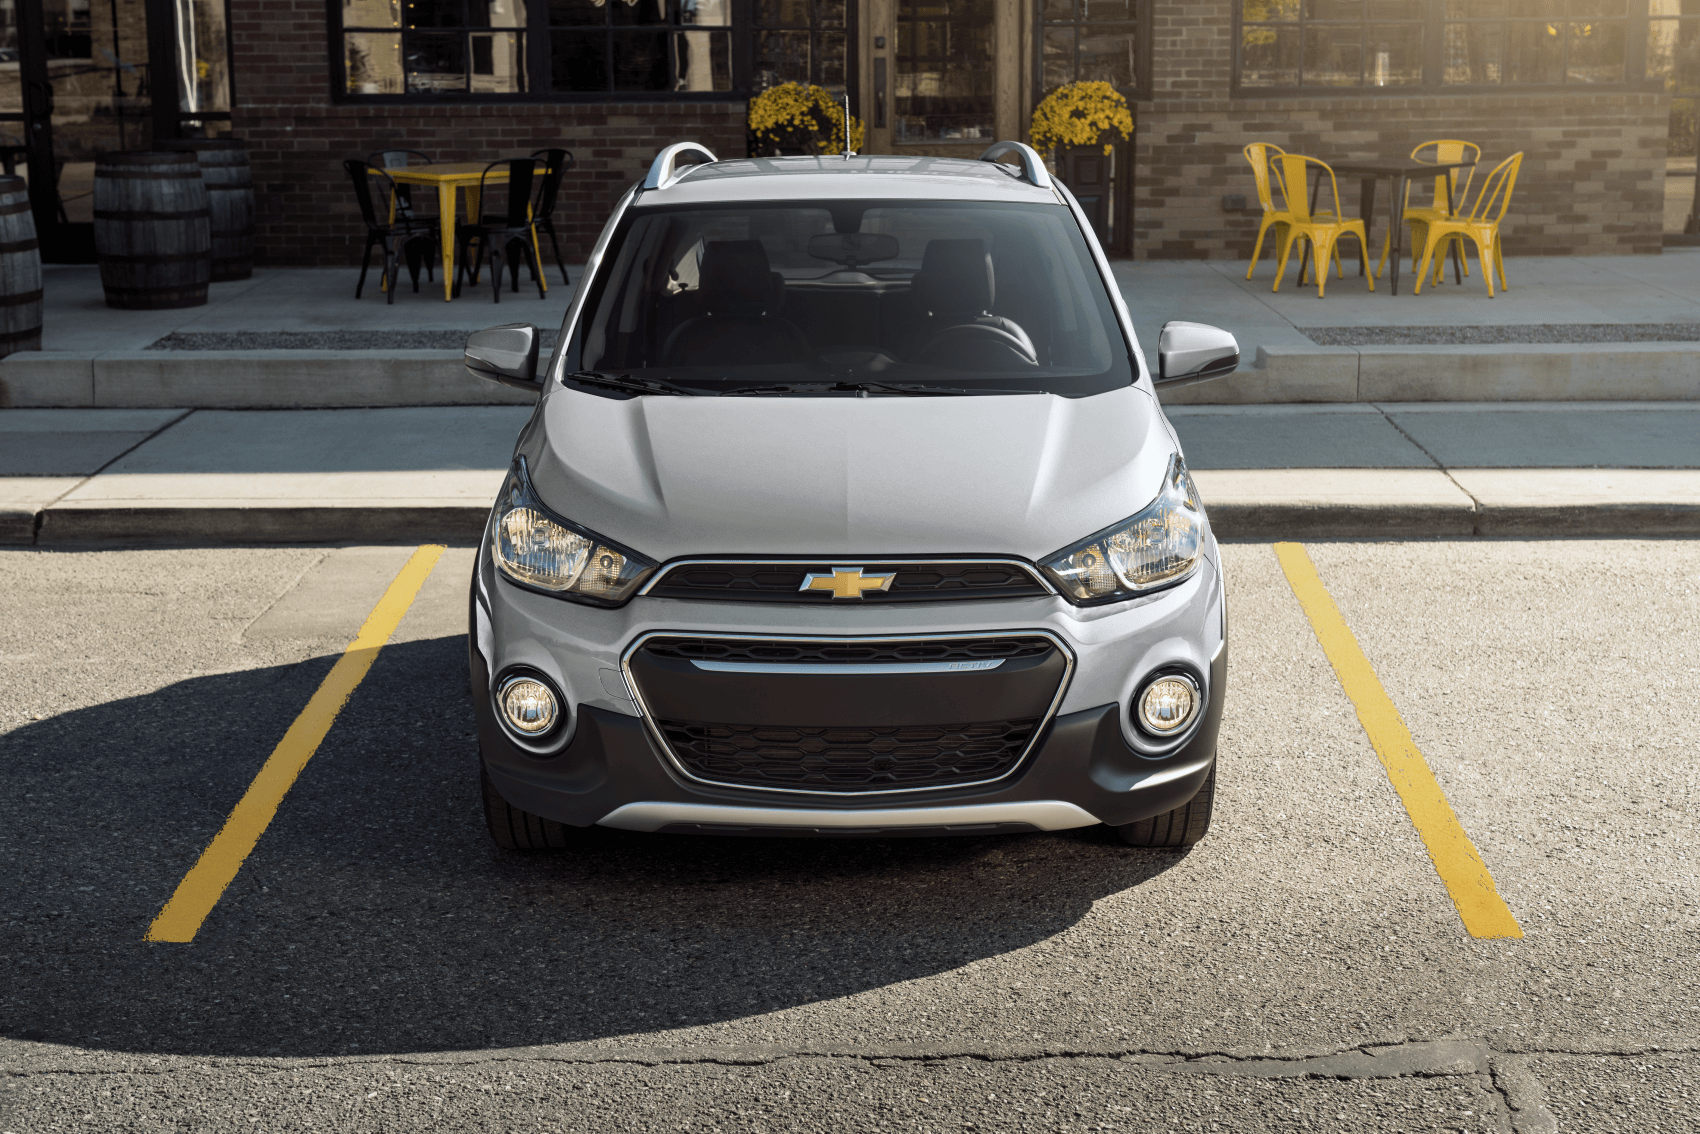 2021 Chevy Spark Silver Parking Spot Andy Mohr Speedway Chevrolet